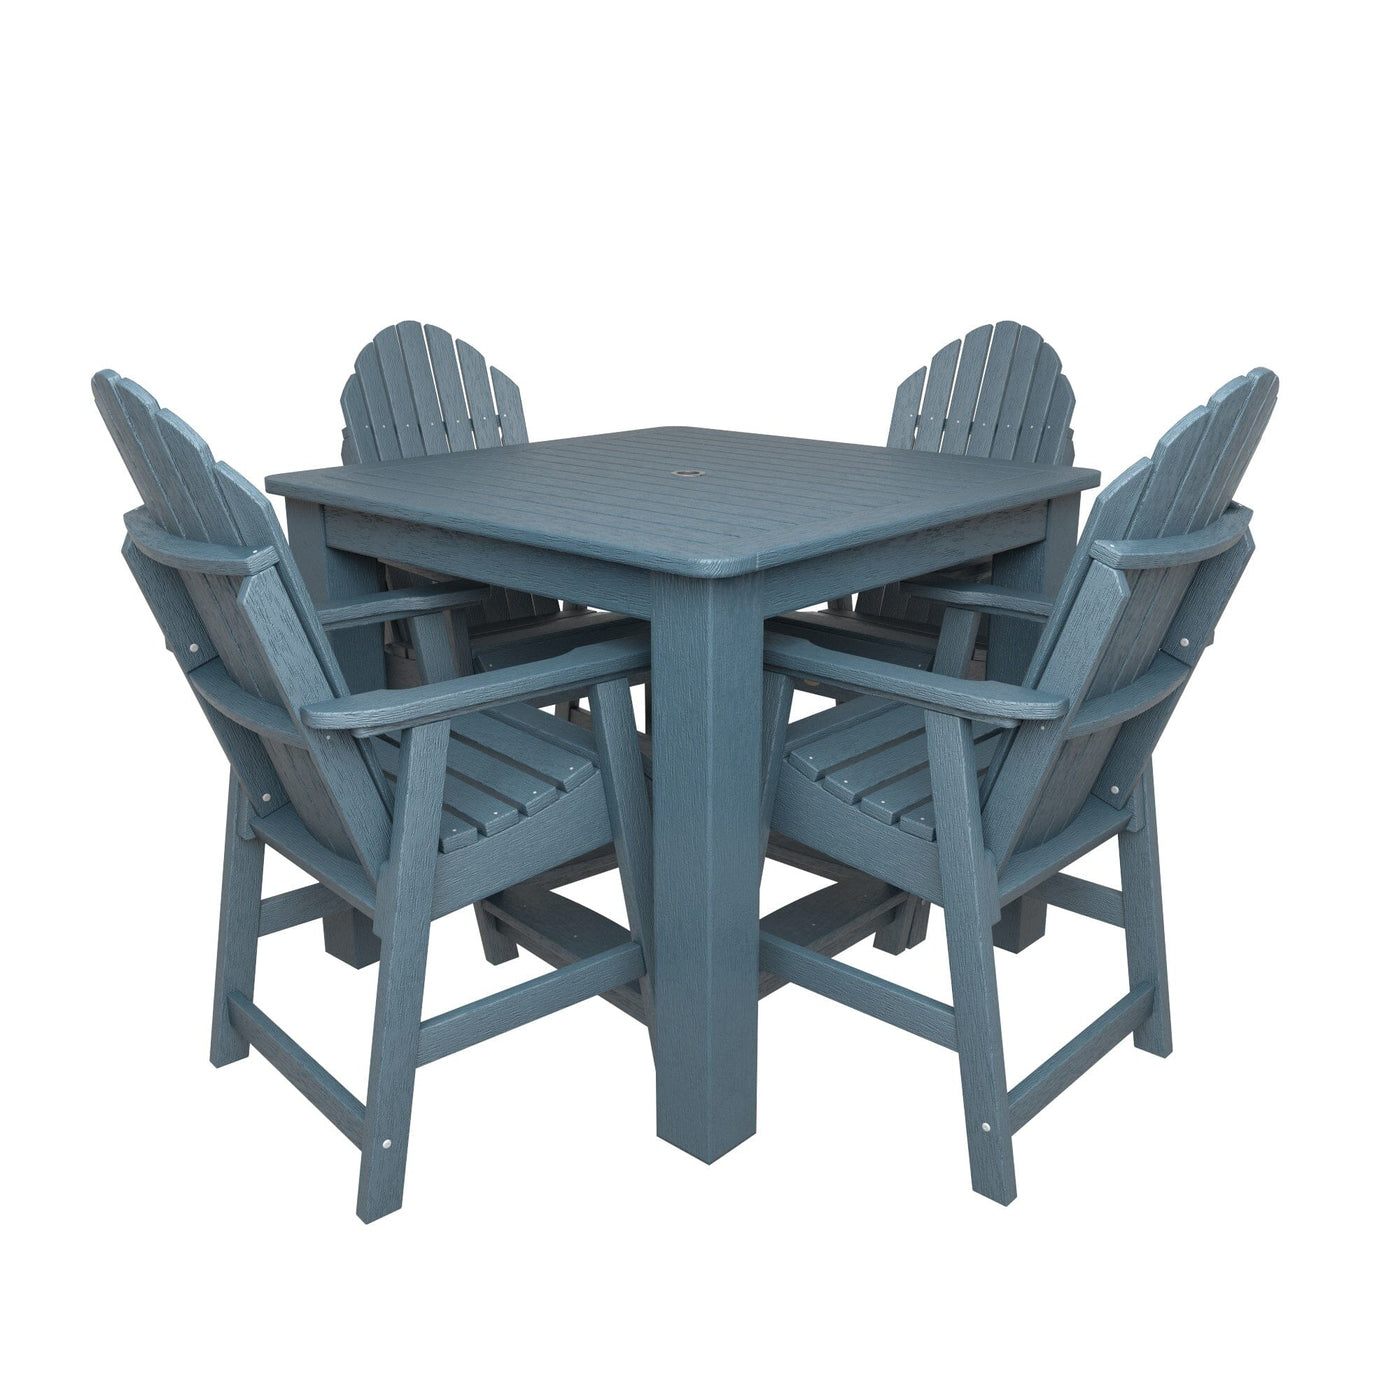 Hamilton 5pc Square Dining Set 42in x 42in - Counter Height Dining Highwood USA Nantucket Blue 